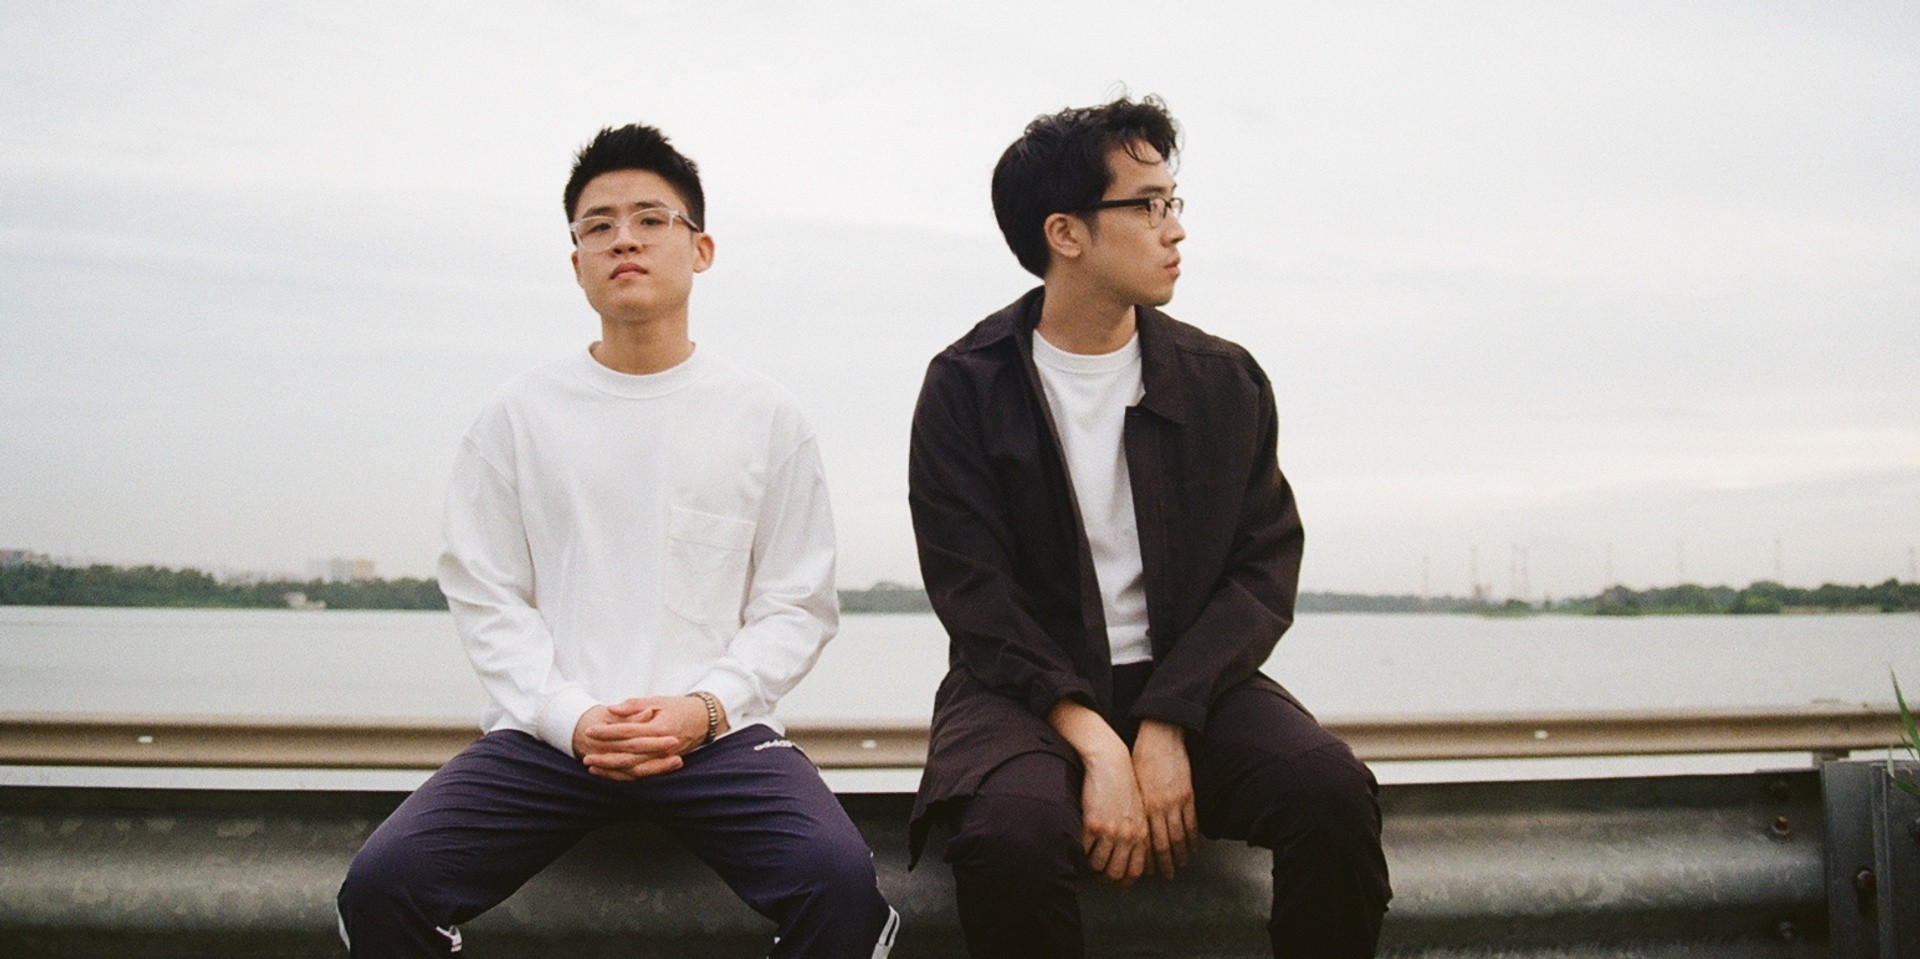 Get to know the 'Two Sides' of Gentle Bones and Charlie Lim